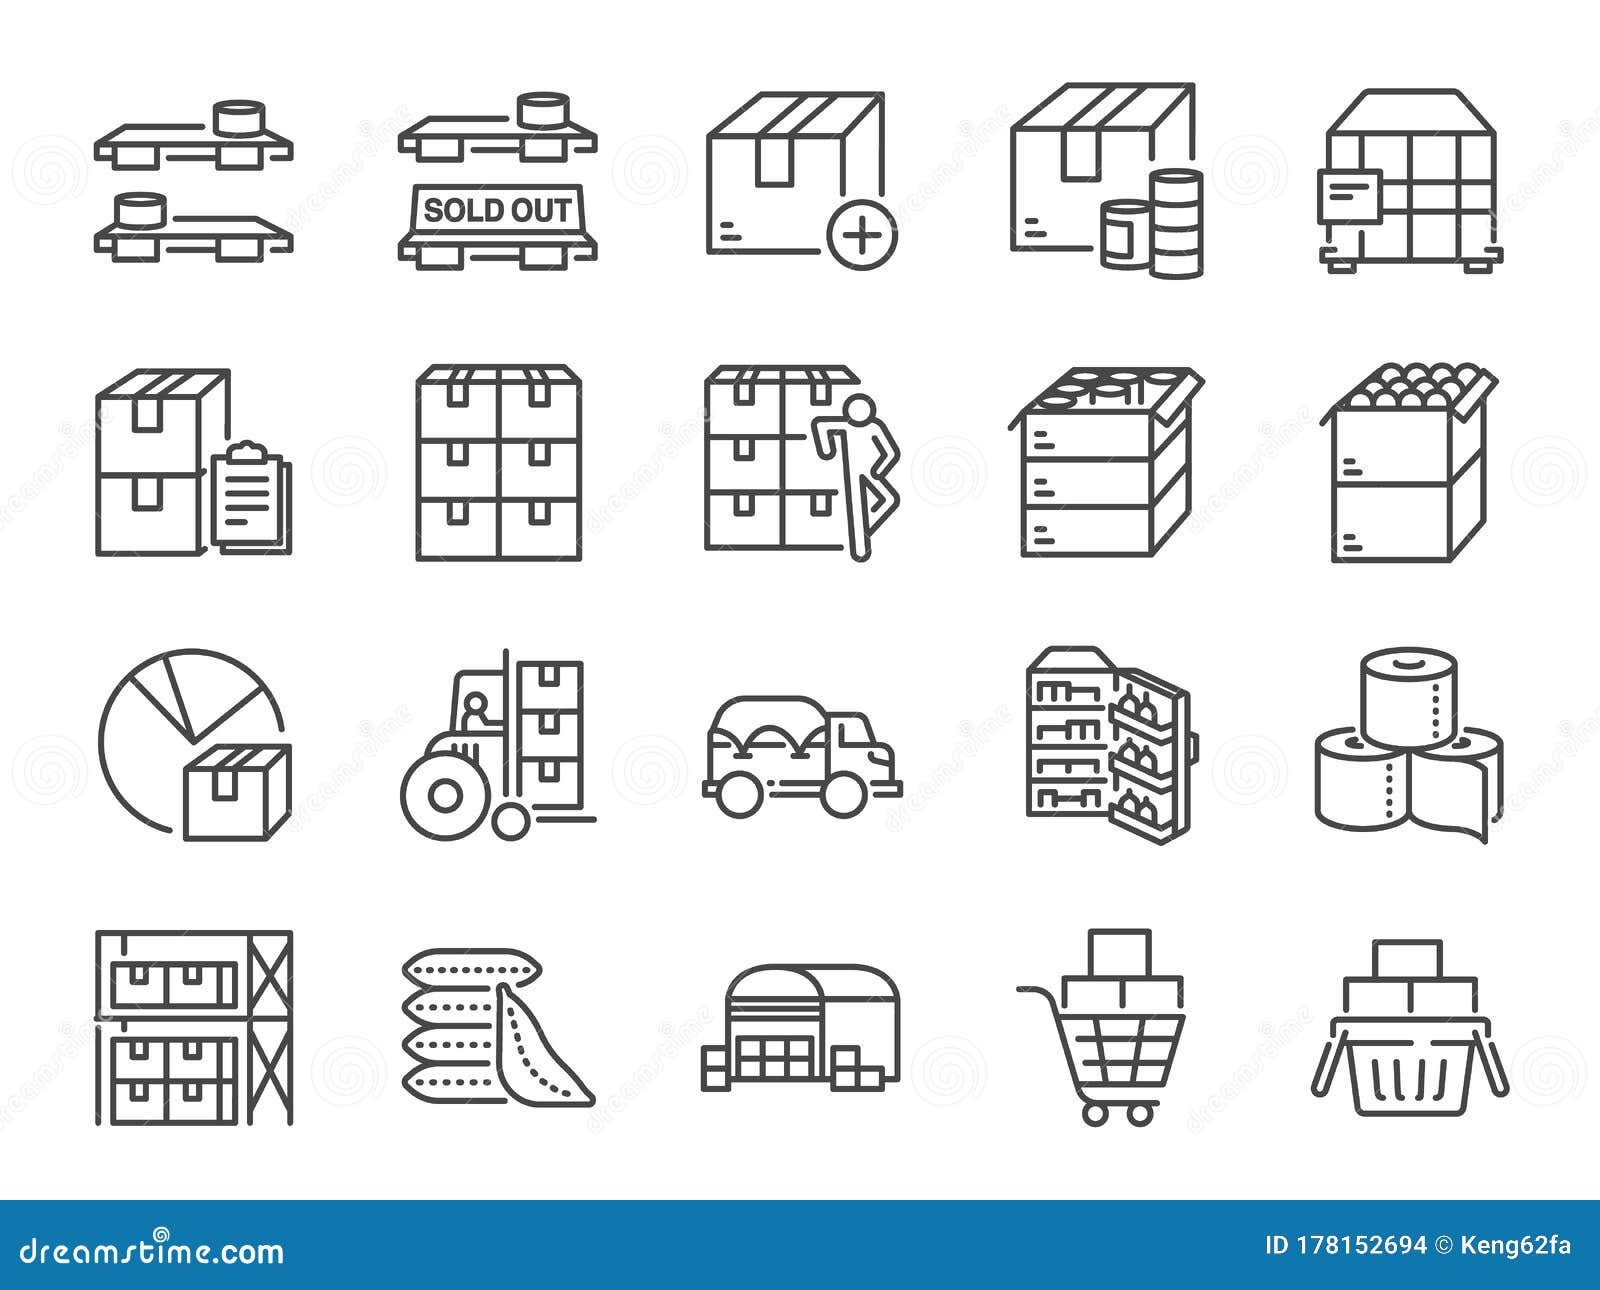 stockpile line icon set. included icons as boxes, container, inventory, supplies,ÃÂ stock up, food and more.